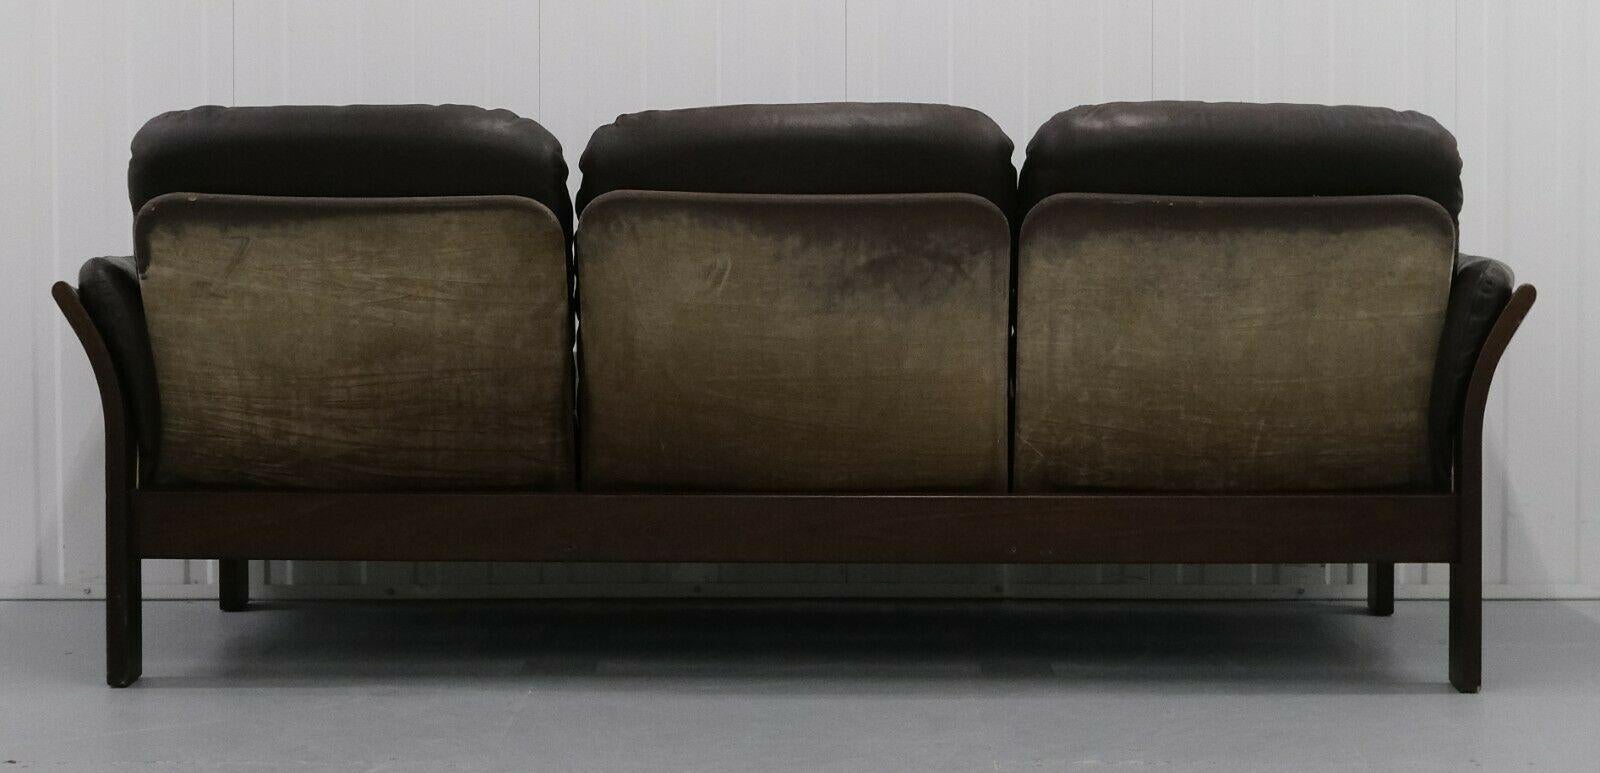 Stunning Thams Kvalitet Brown Leather & Suede Three Seater Sofa Bentwood Frame For Sale 2